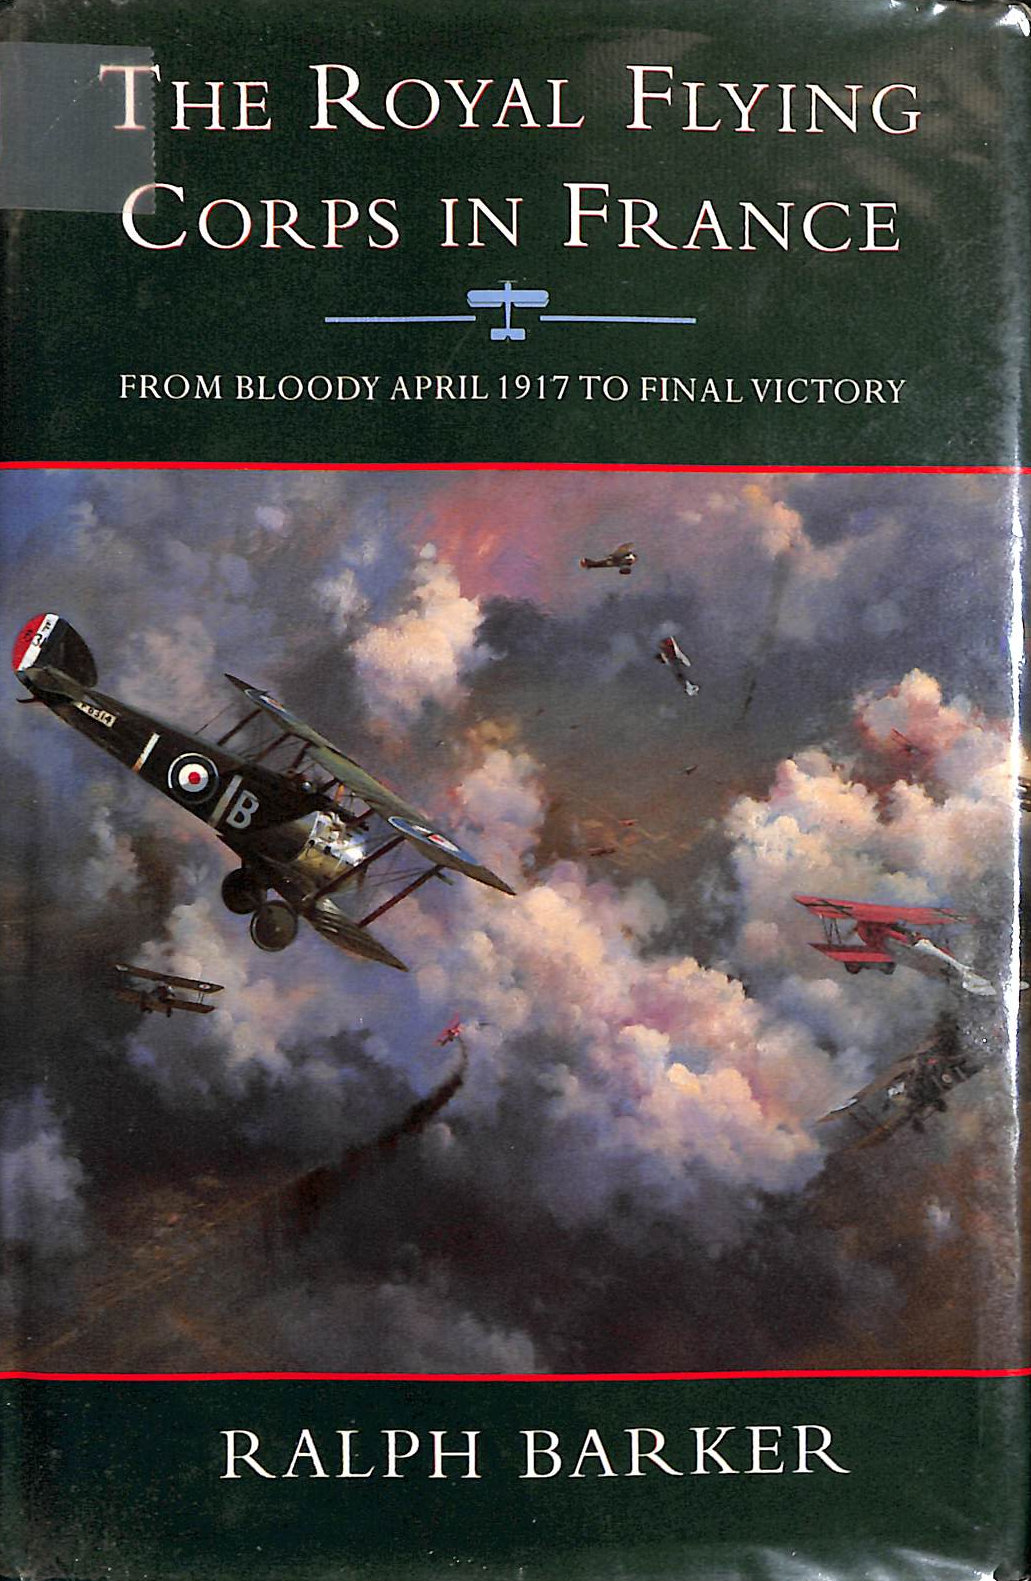 BARKER, RALPH - The Royal Flying Corps in France: From Bloody April 1917 To Final Victory